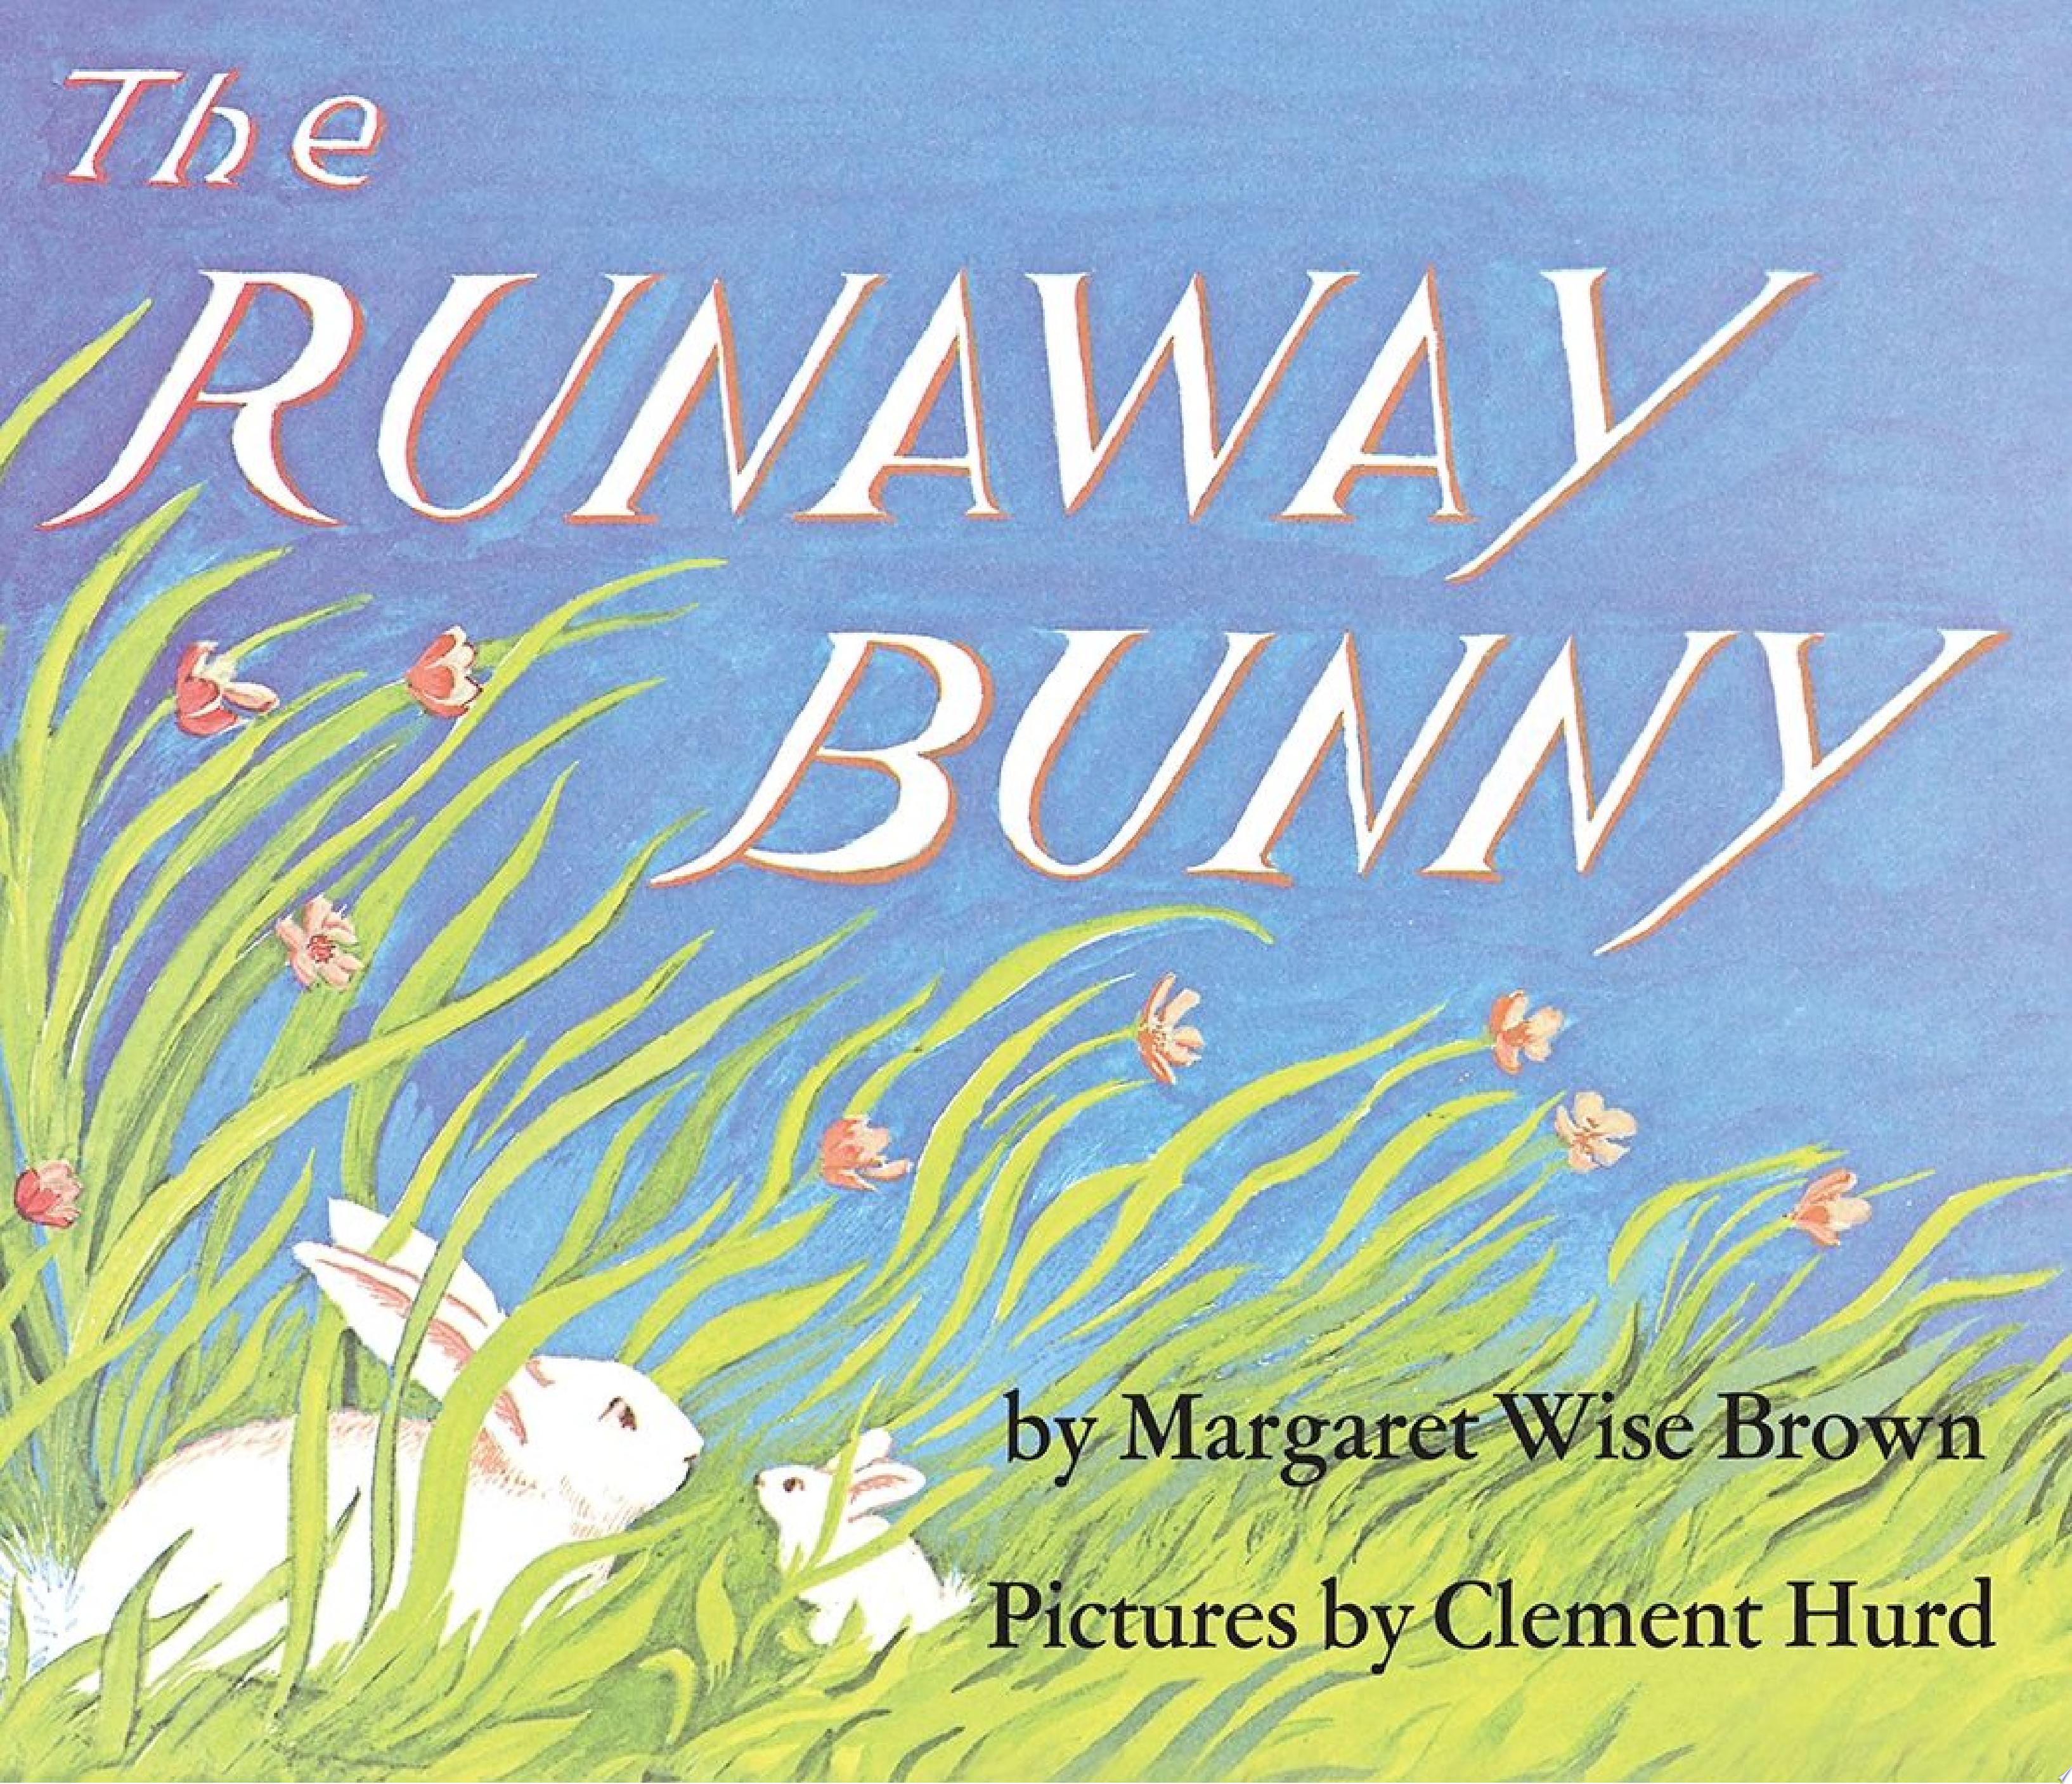 Image for "The Runaway Bunny"